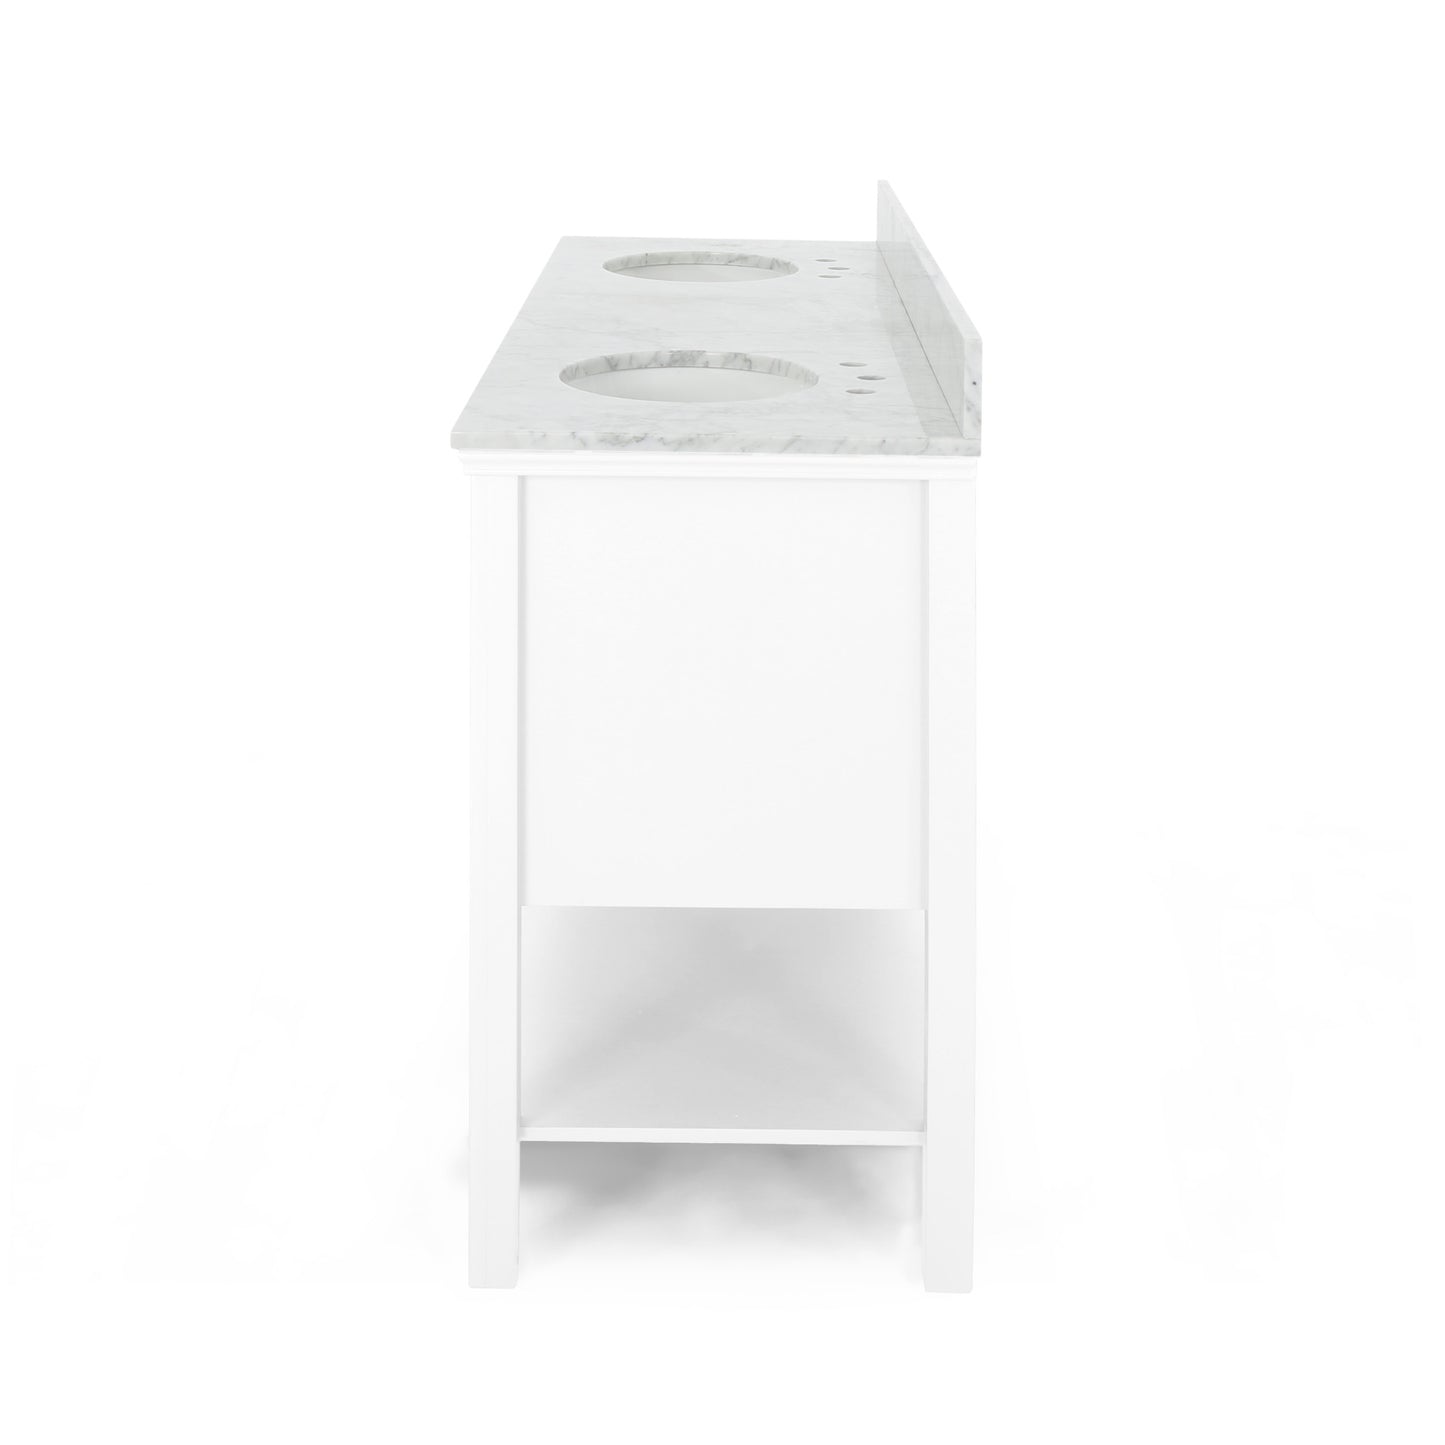 Douvier Contemporary 72" Wood Double Sink Bathroom Vanity with Marble Counter Top with Carrara White Marble